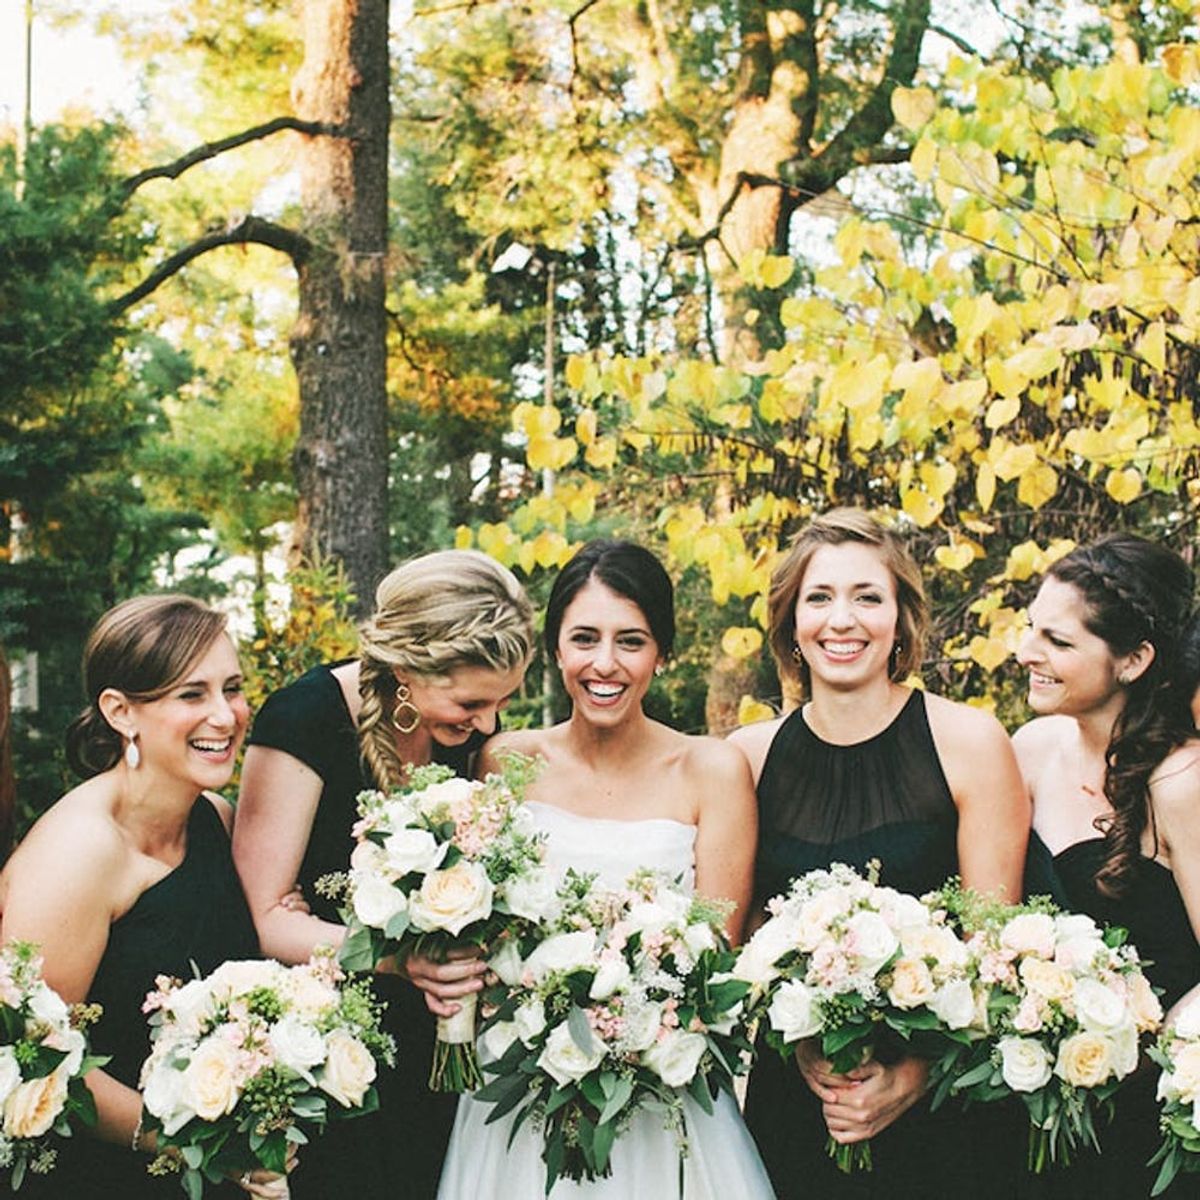 Black and White Details for a Minimalist Wedding